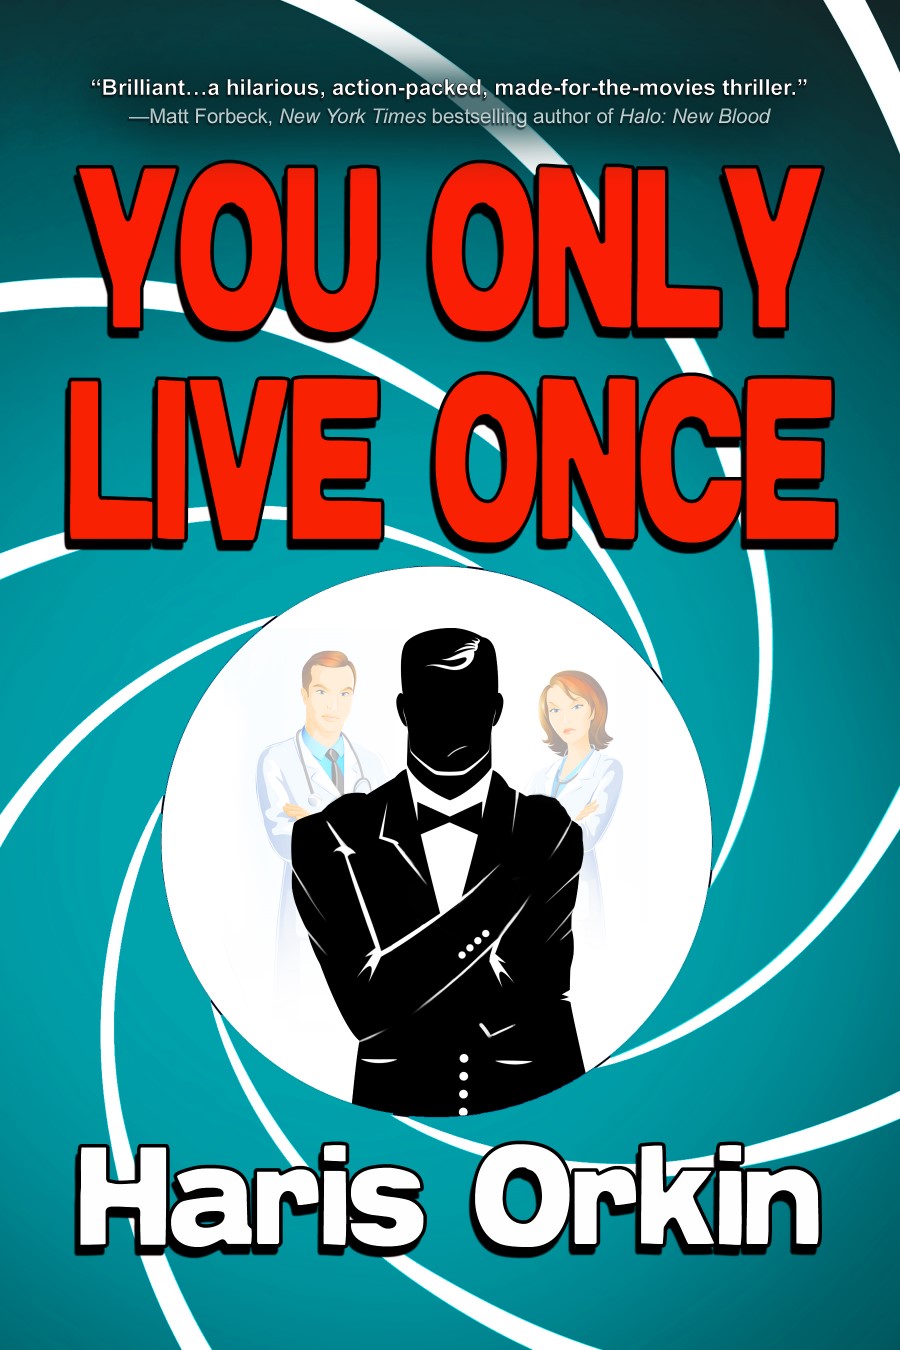 You Only Live Once Front Cover Official resized for website